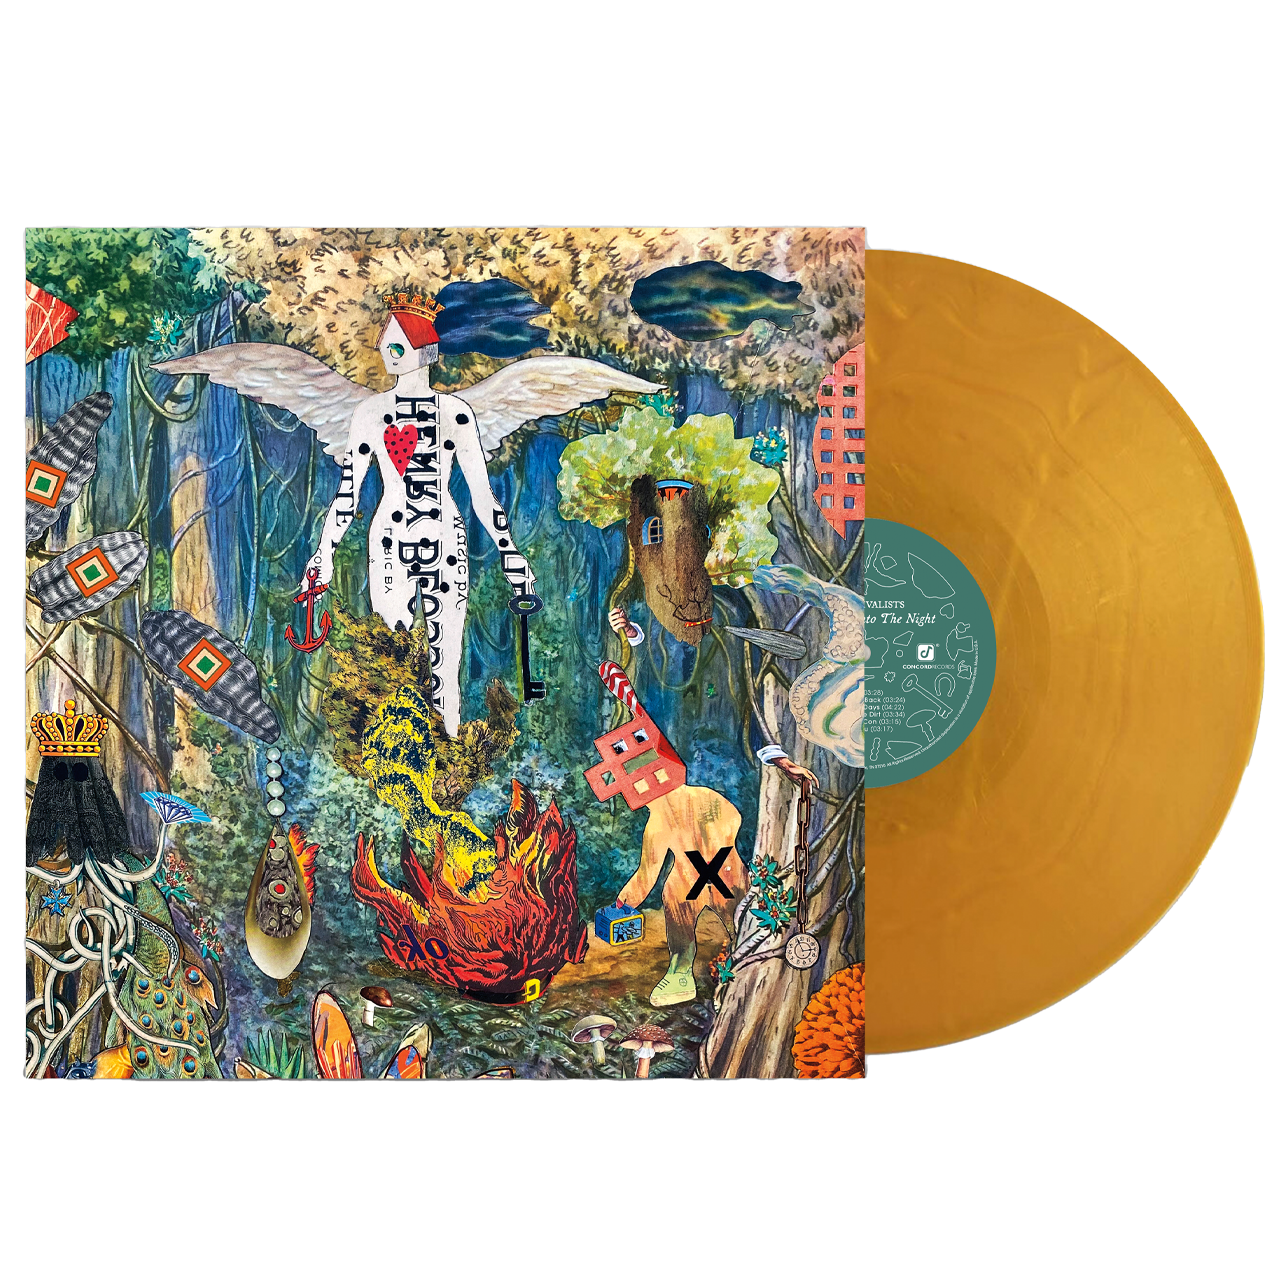 Pour It Out Into The Night Vinyl - Gold